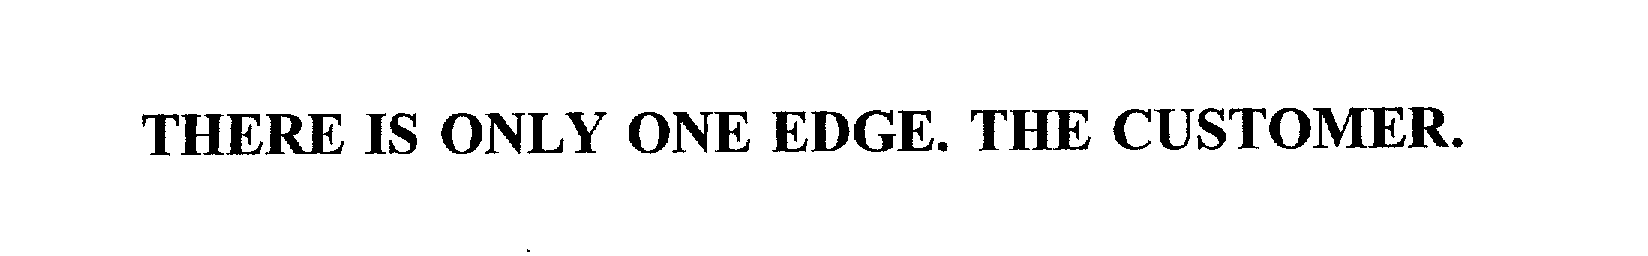  THERE IS ONLY ONE EDGE. THE CUSTOMER.